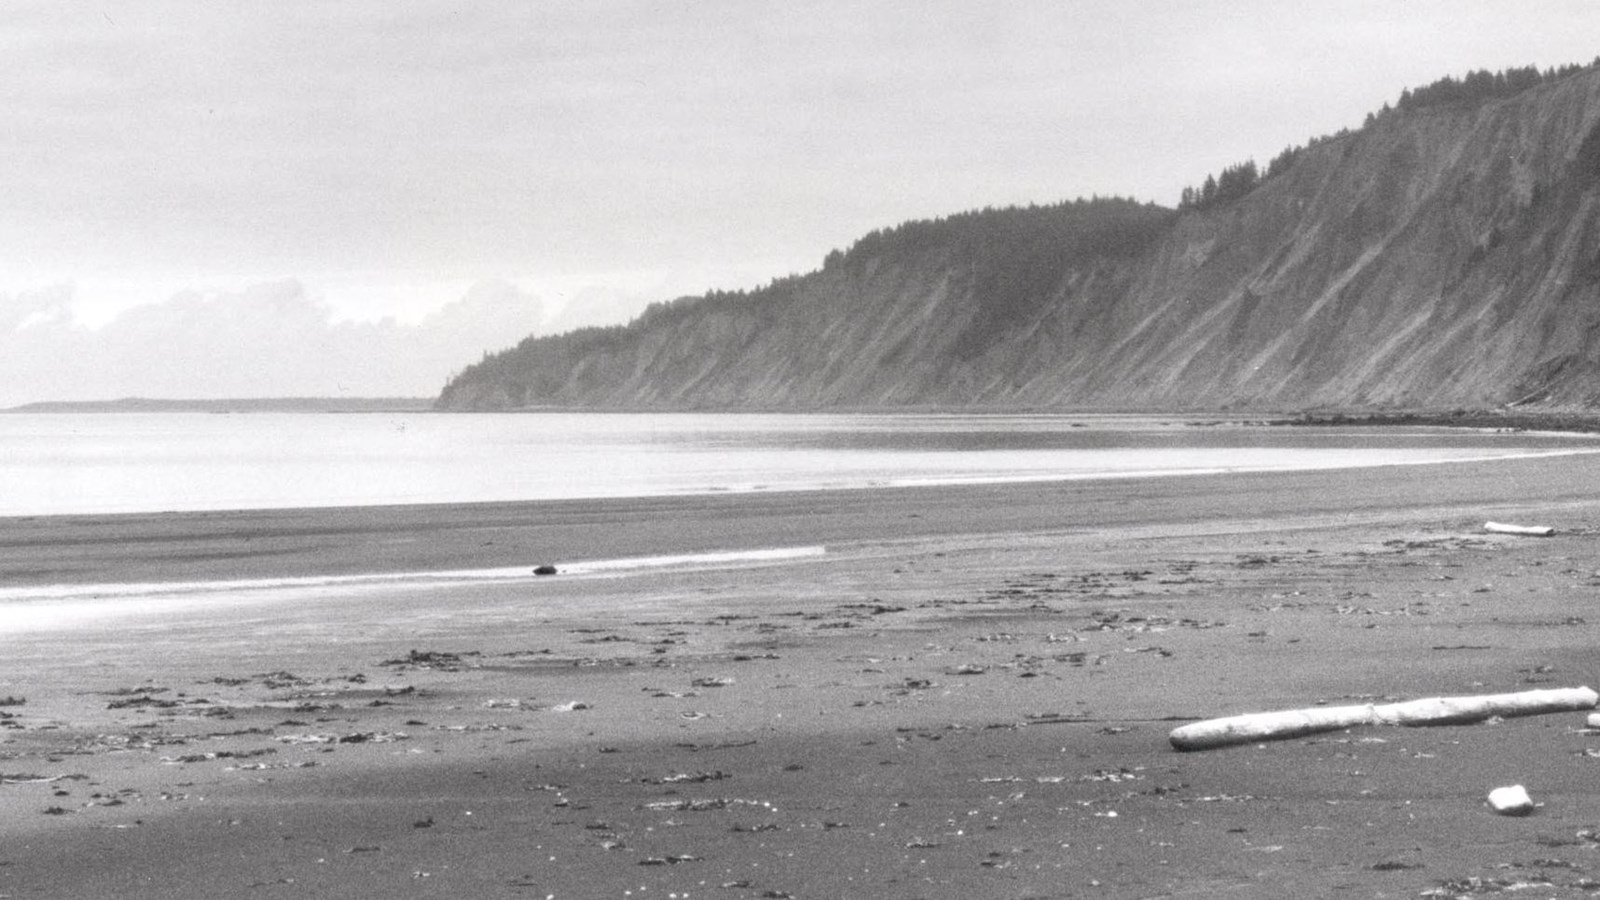 Black and white photo of a sandy beach with steep cliffs, driftwood, and kelp.